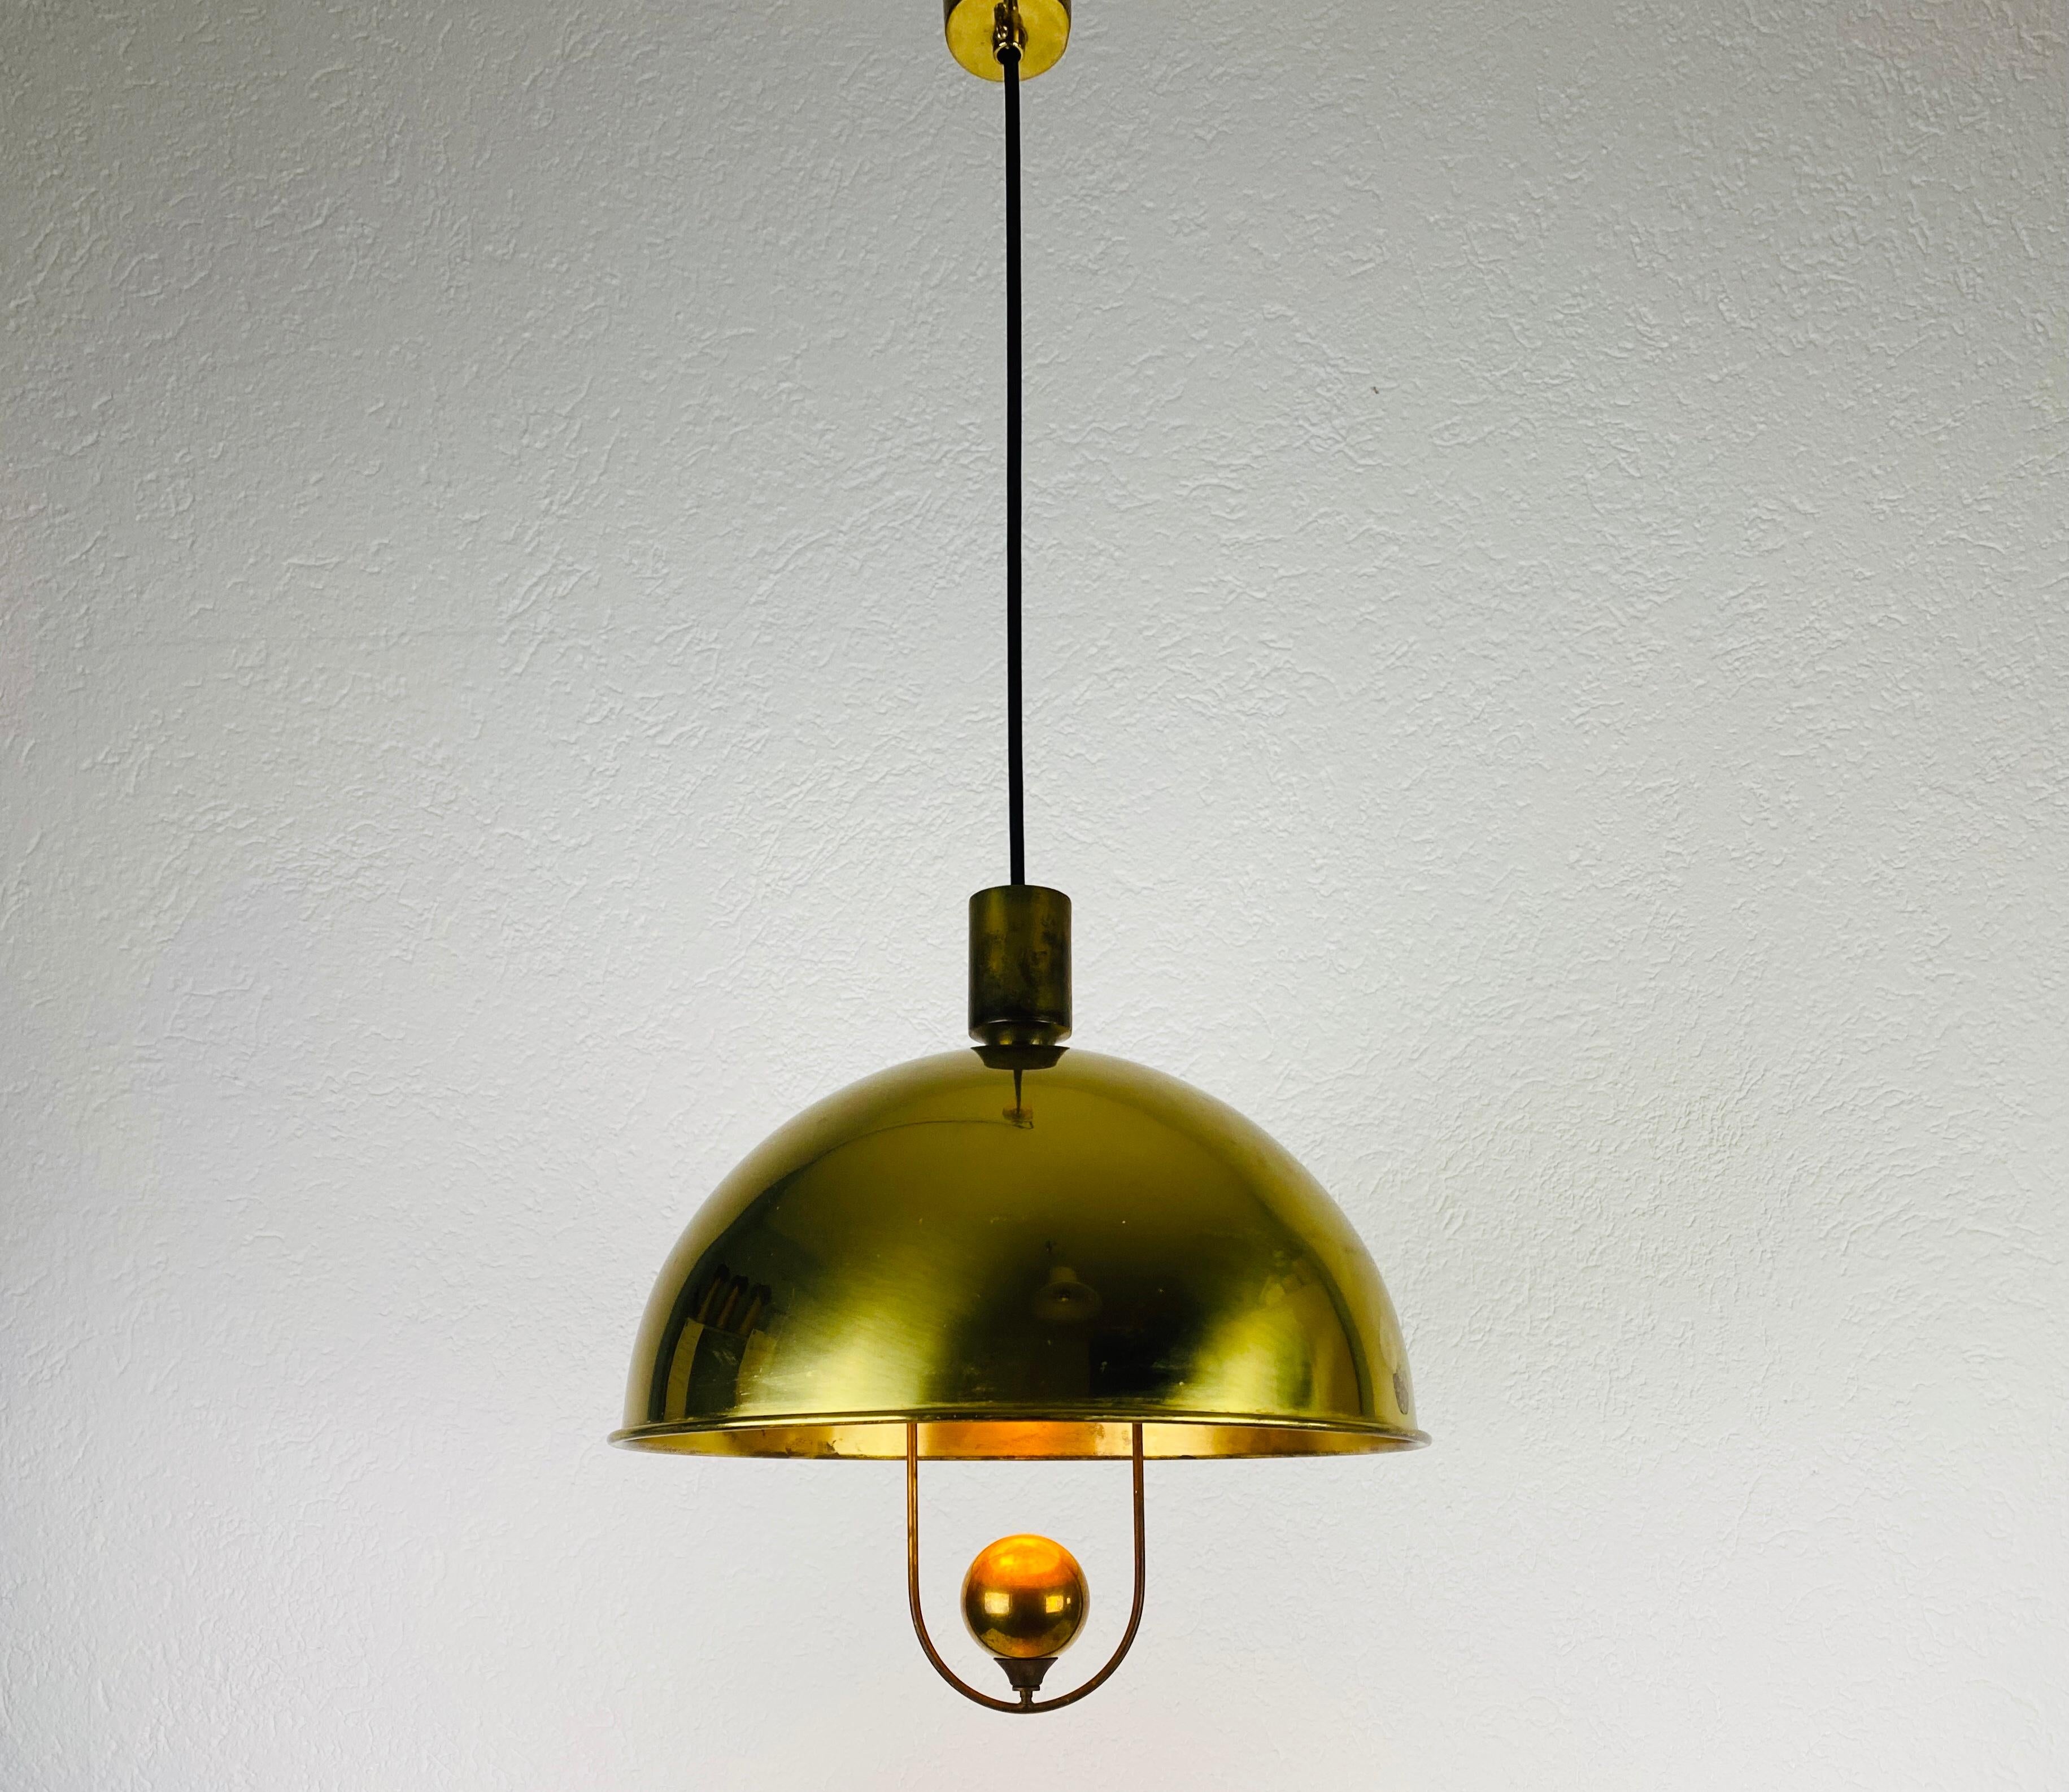 Extraordinary polished brass pendant lamp designed by Florian Schulz and made in Germany in the 1970s. It is fascinating with its Exclusive Design. The height of the lighting is adjustable.

Measurements of shade:
Max height 84 cm
Height 36